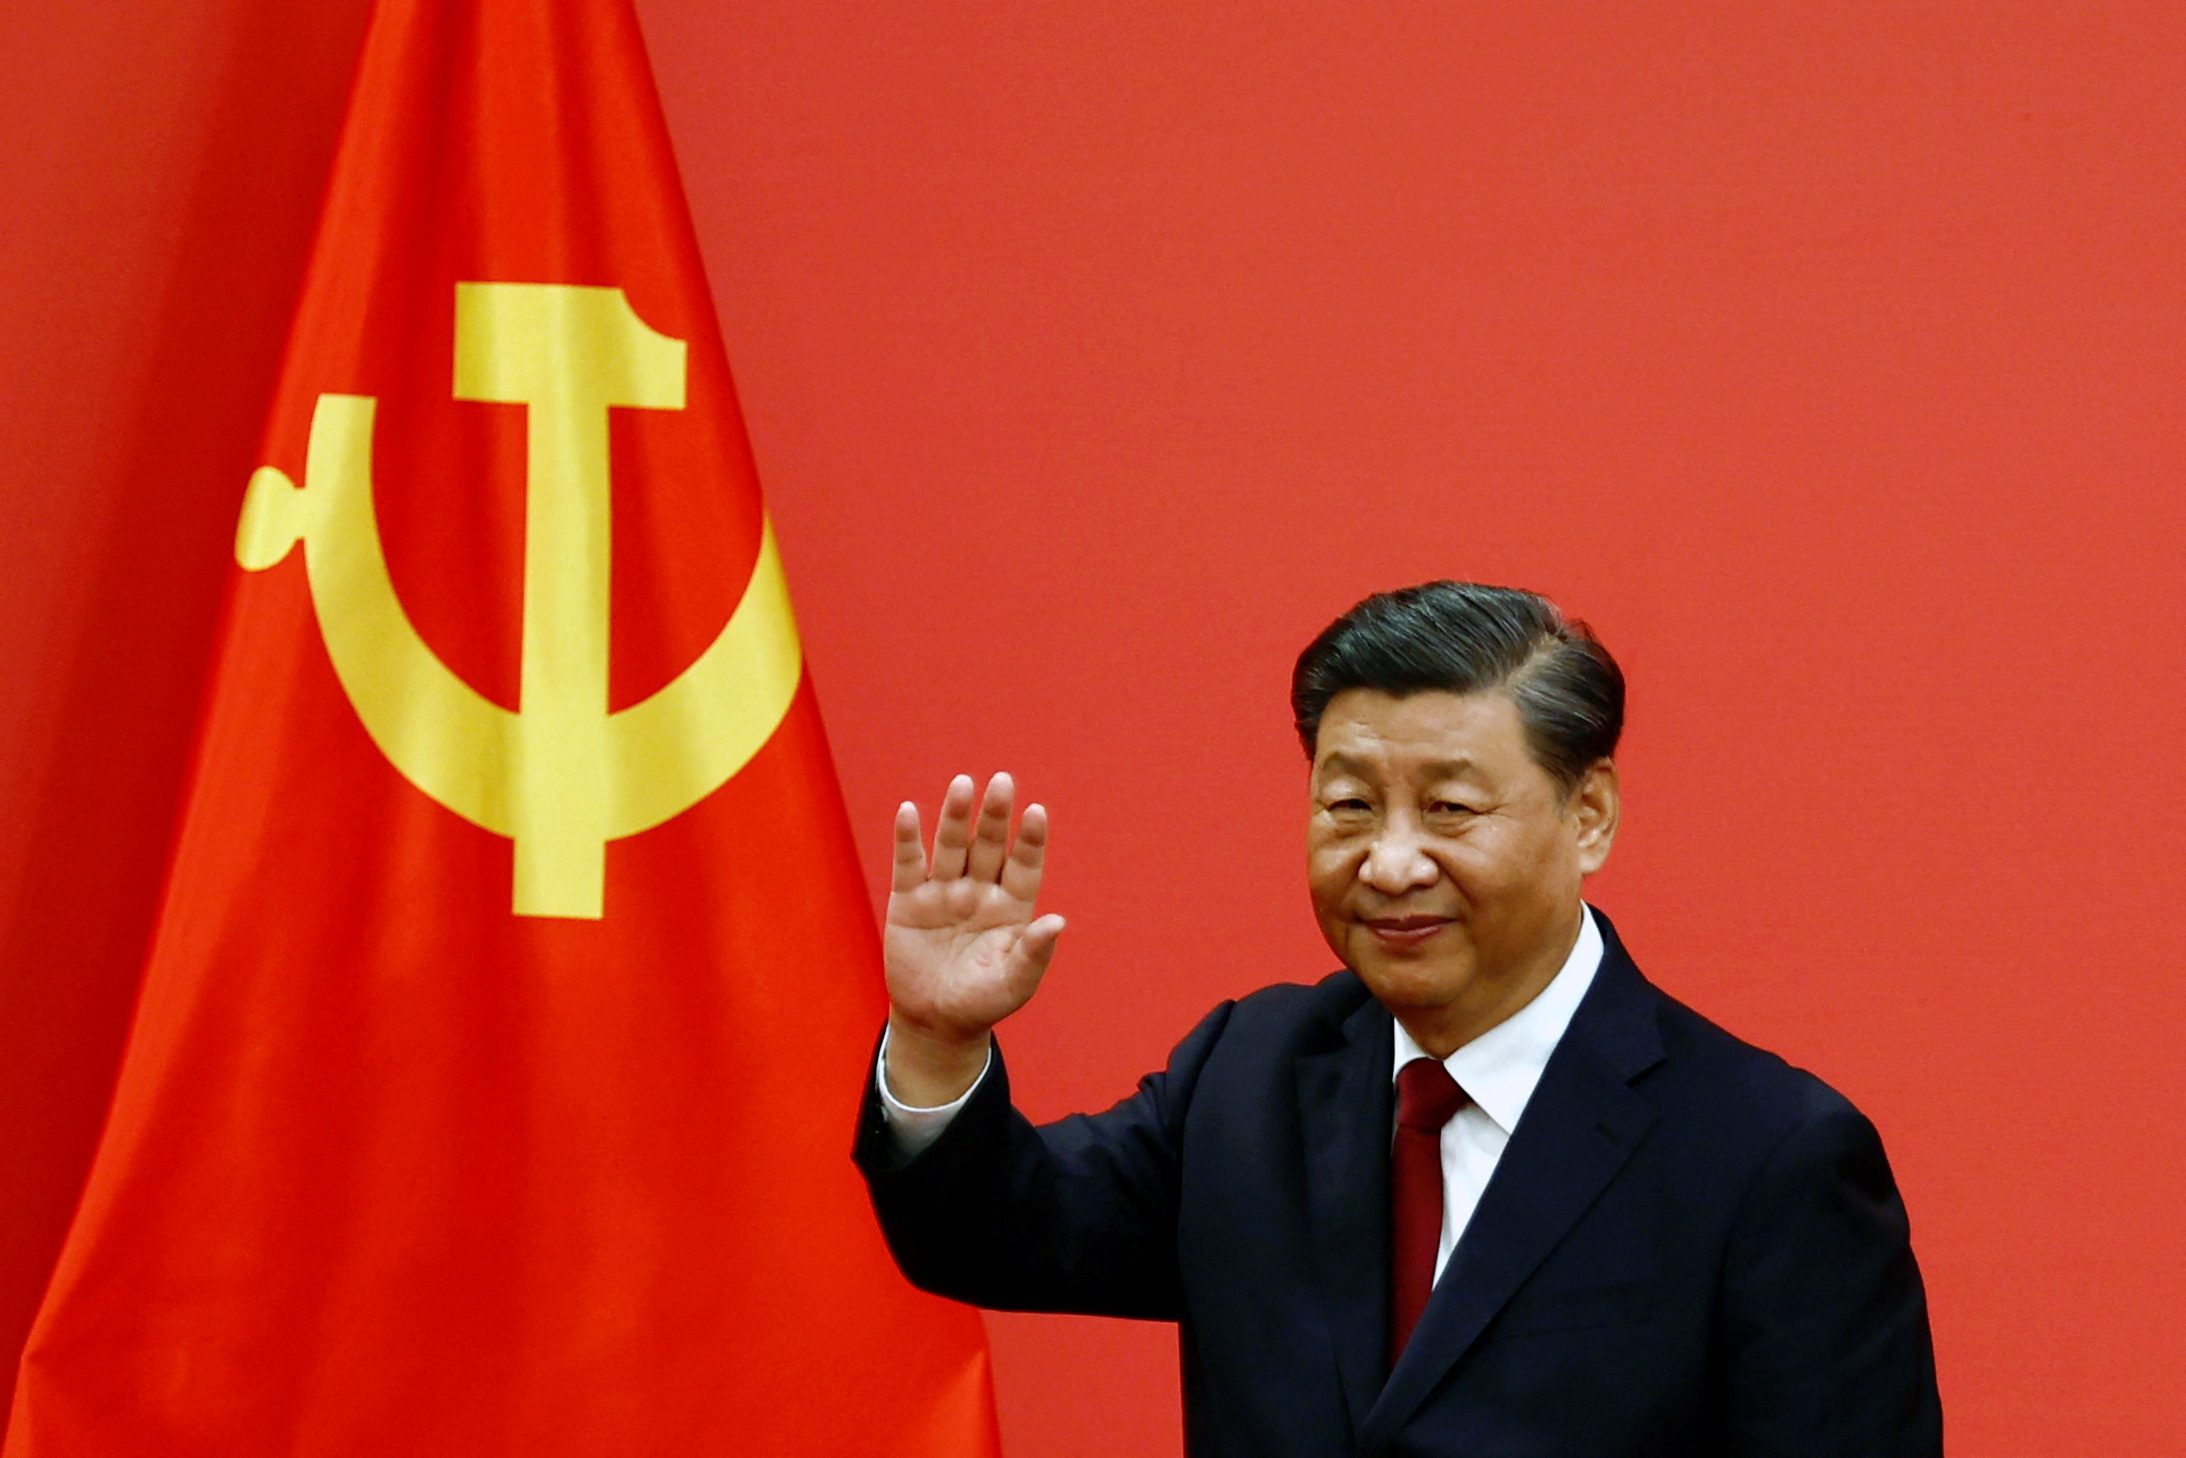 Foreign business groups in China wary as new Xi term begins